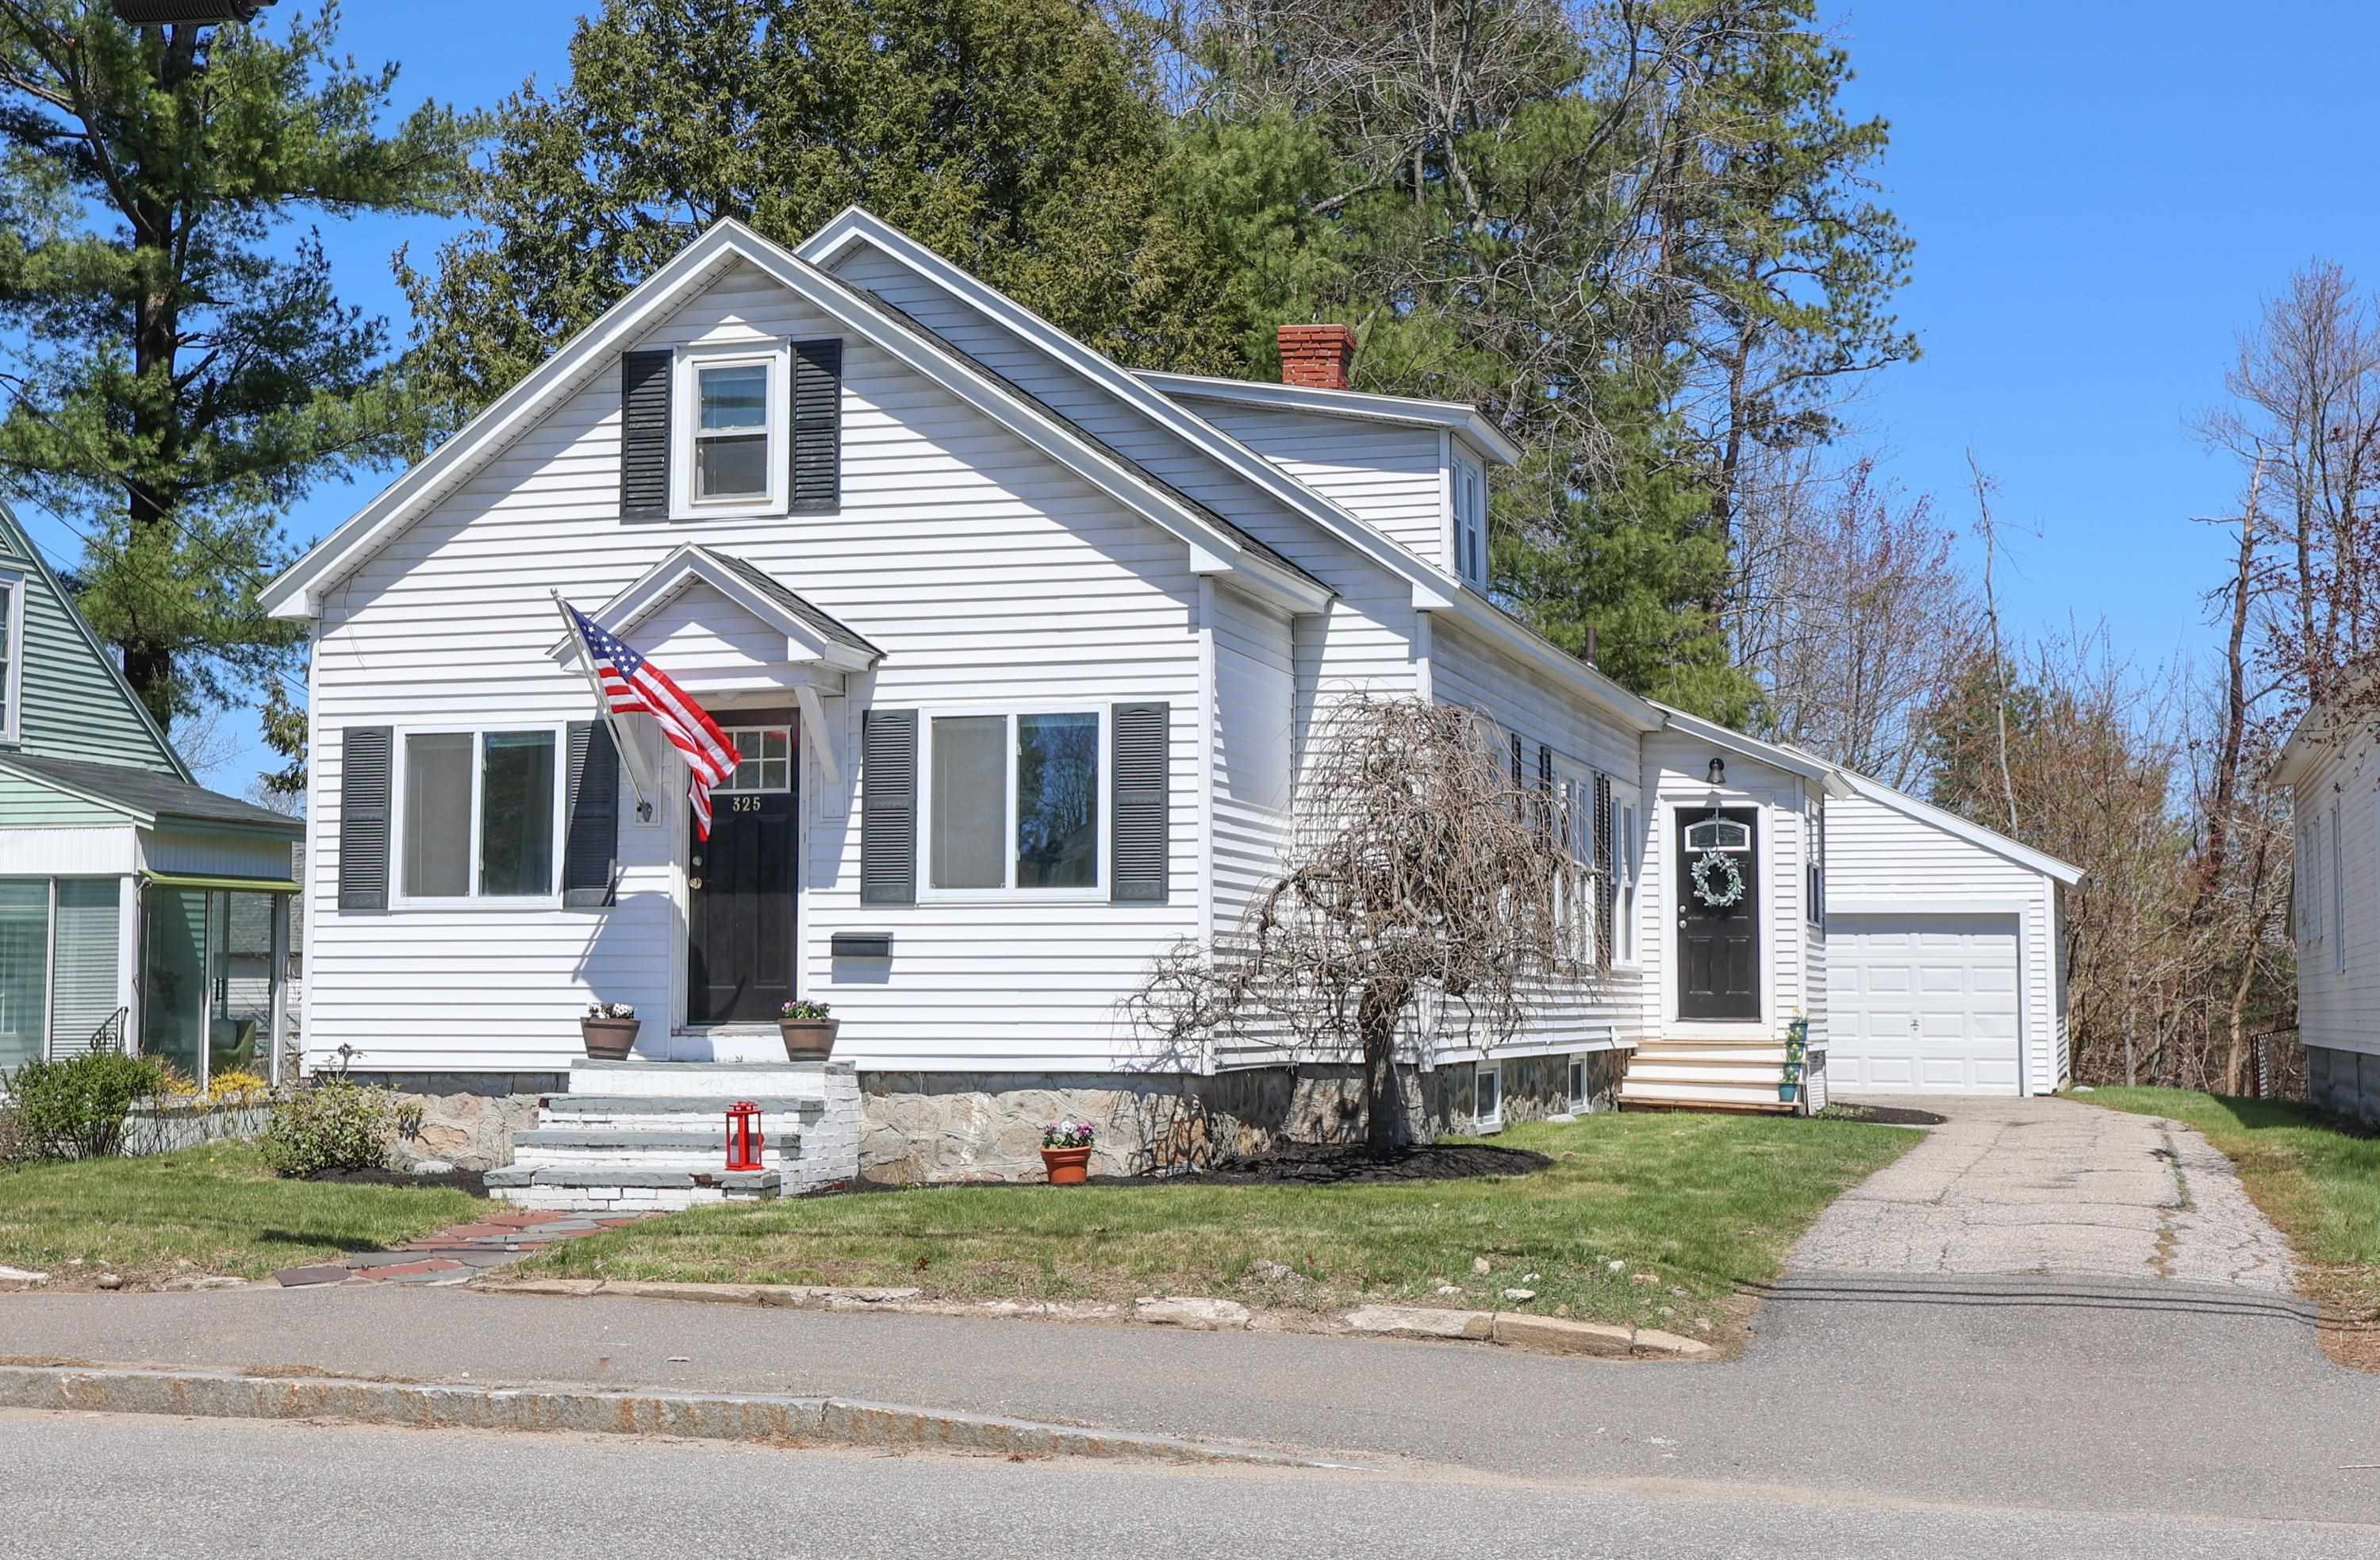 2 Story Single Family Home in Manchester NH